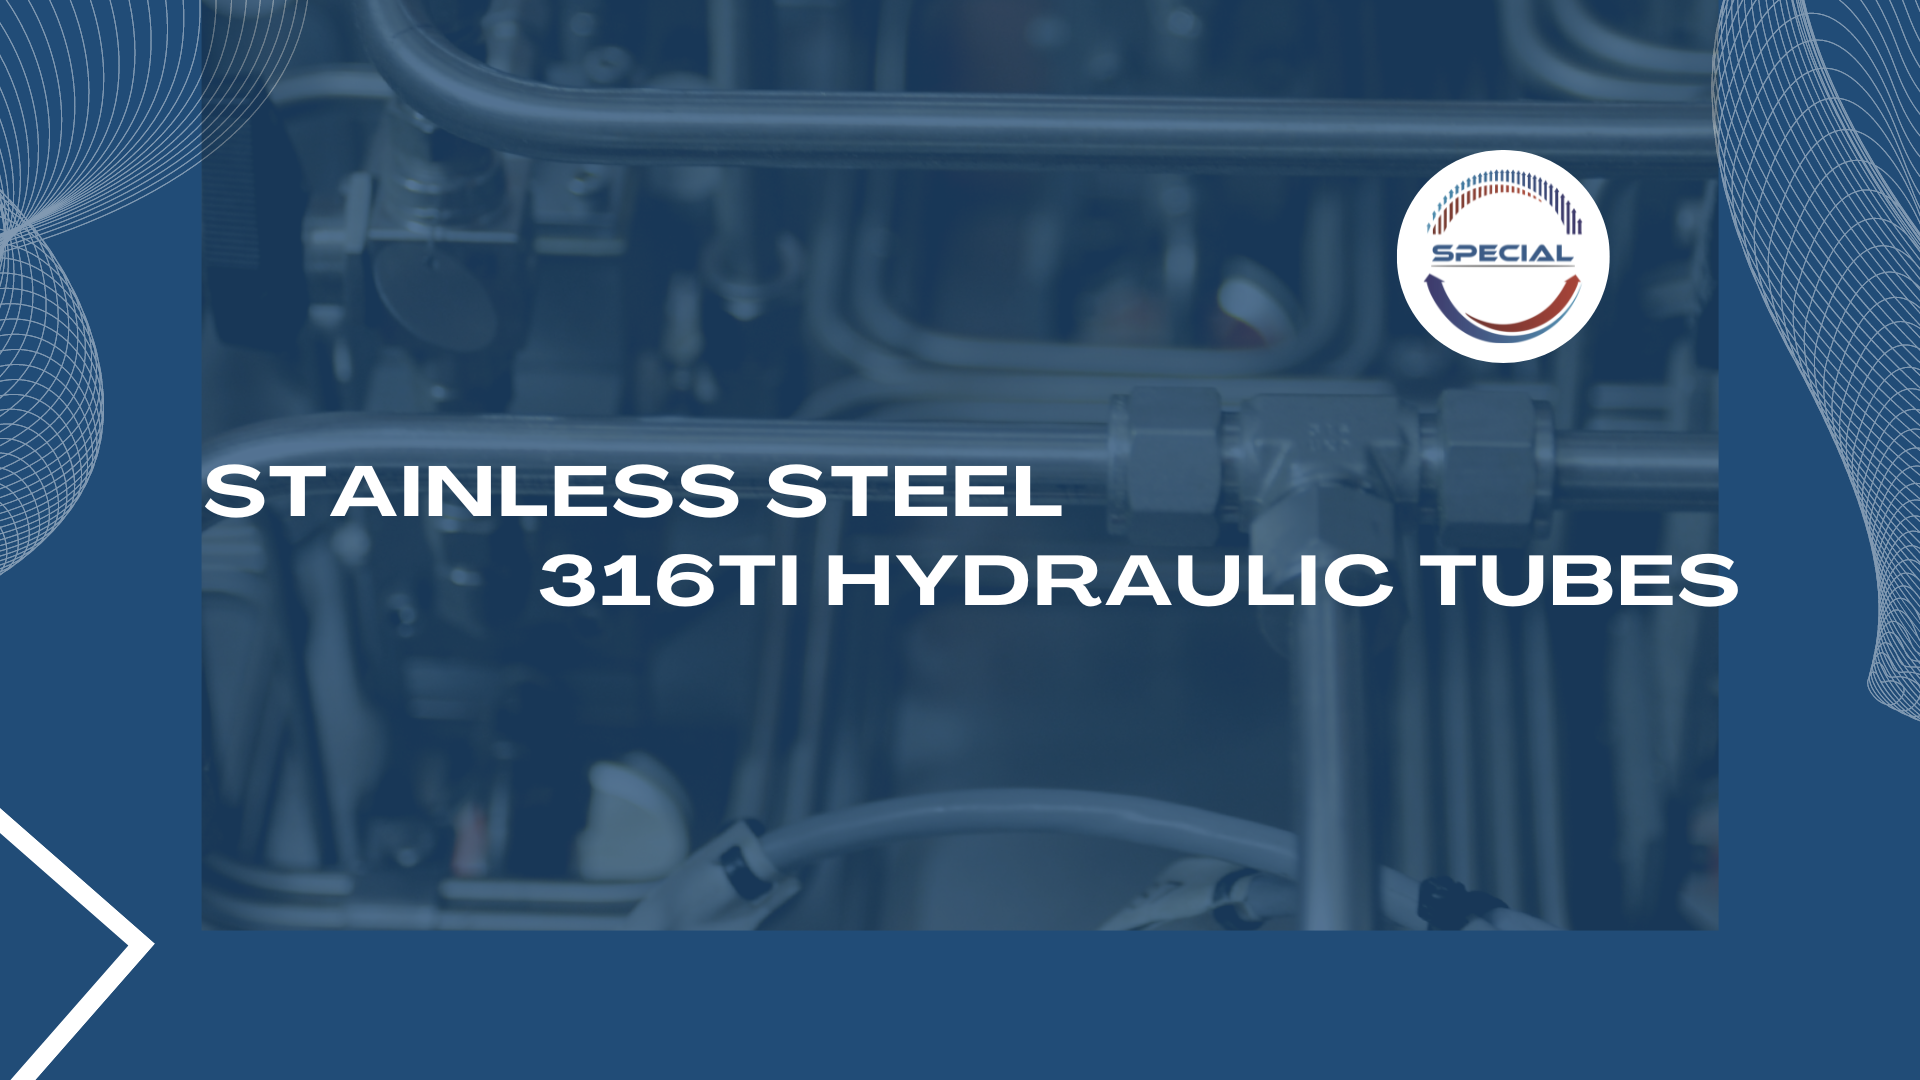 Stainless Steel 316Ti Hydraulic Tubes